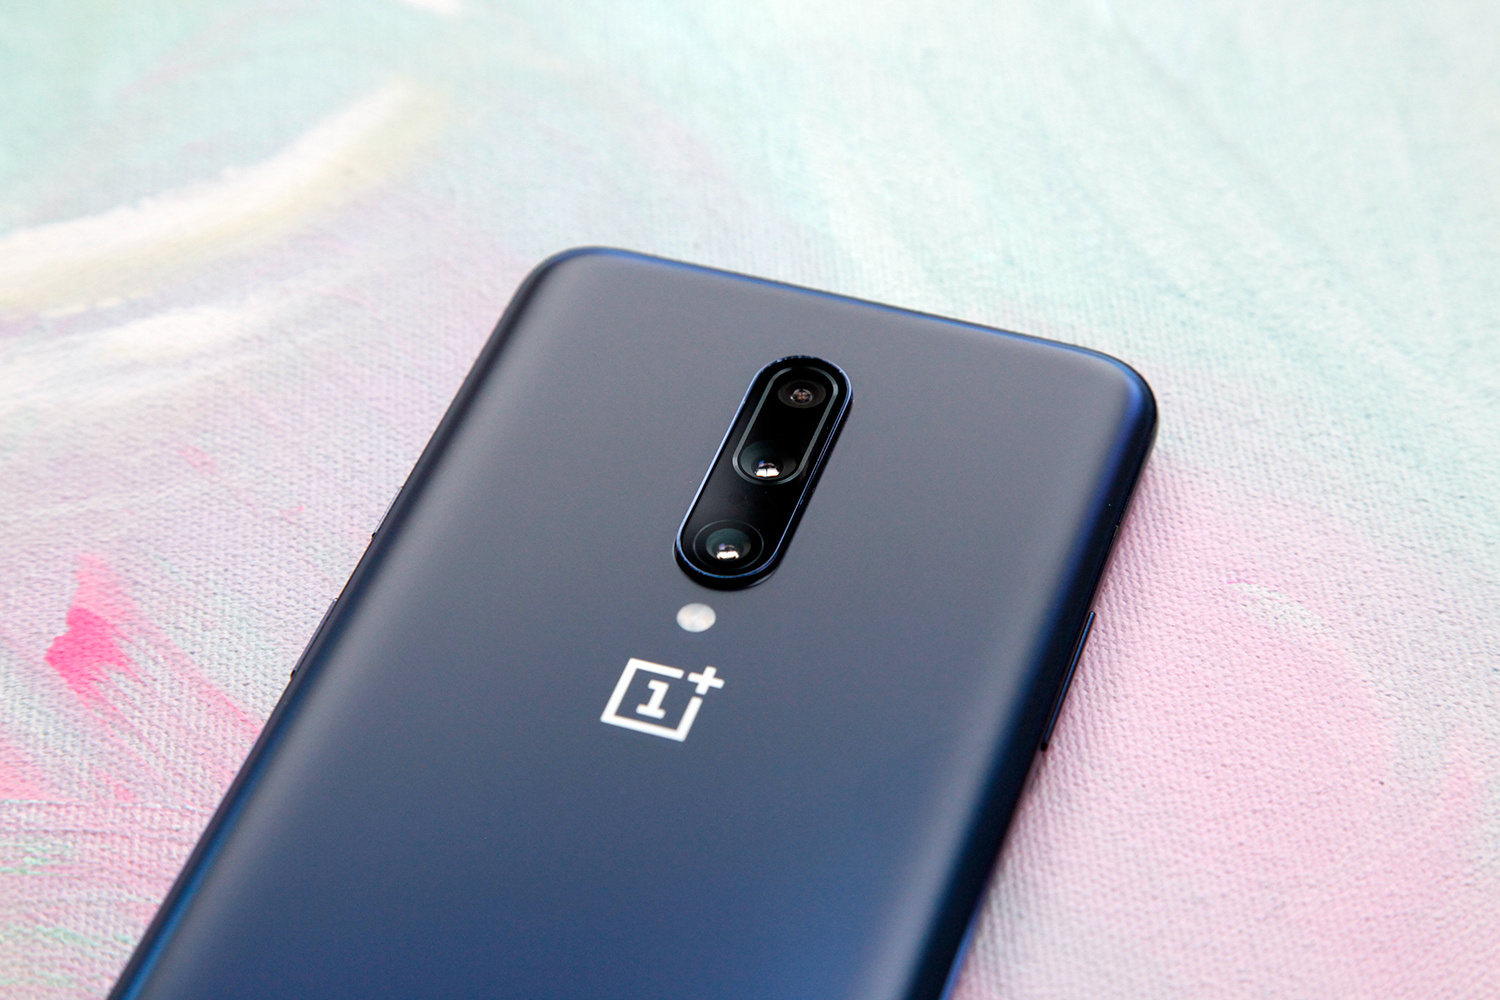 OnePlus starts rolling out camera improvement update to the 7 Pro